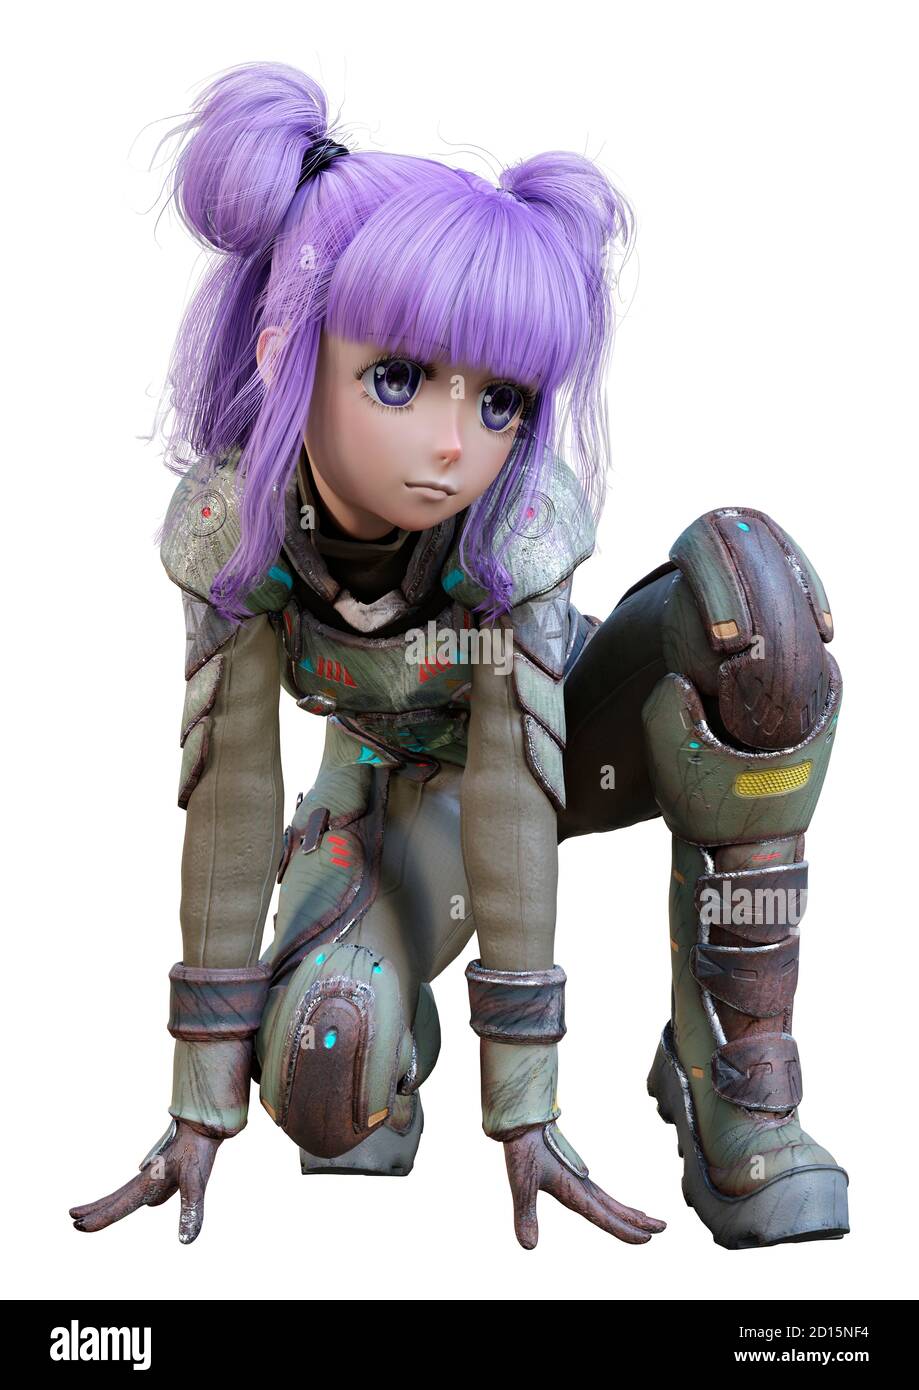 3D rendering of an anime teenager girl with purple hair in an